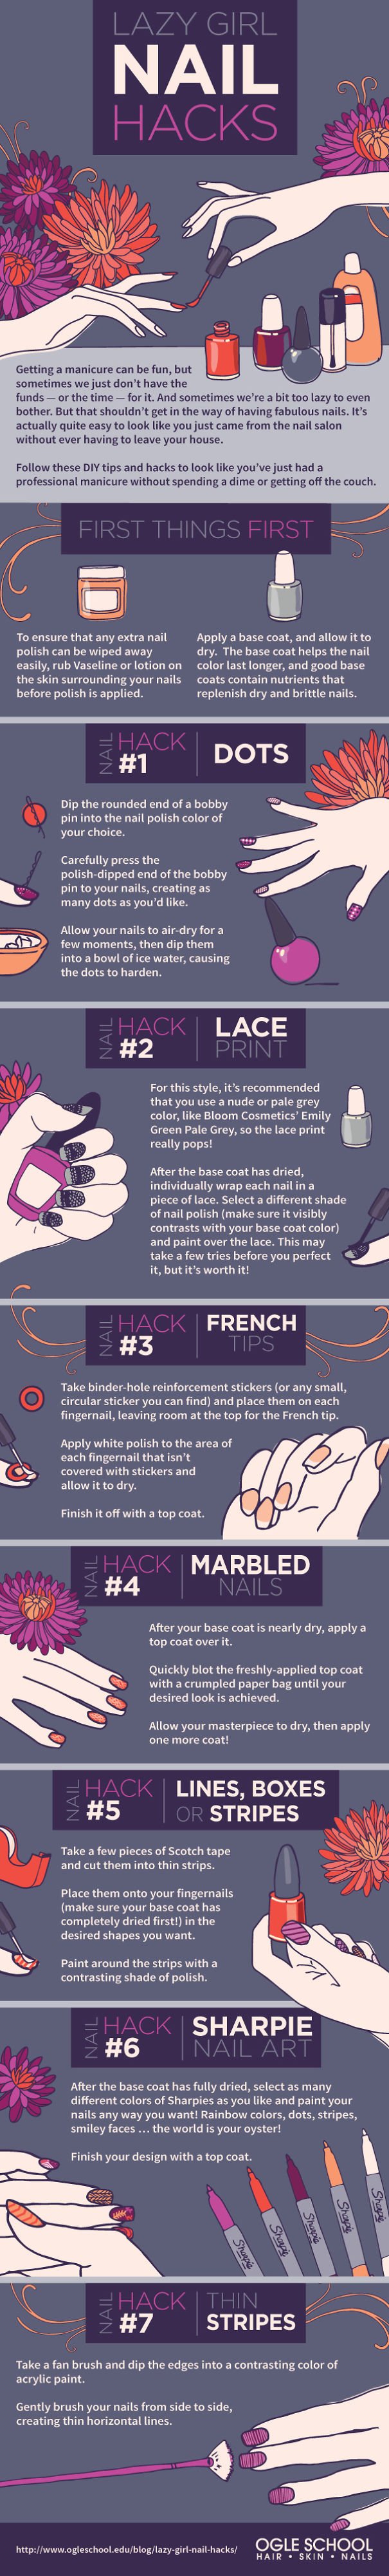 The Ultimate Guide To Hassle Free Nail Hacks